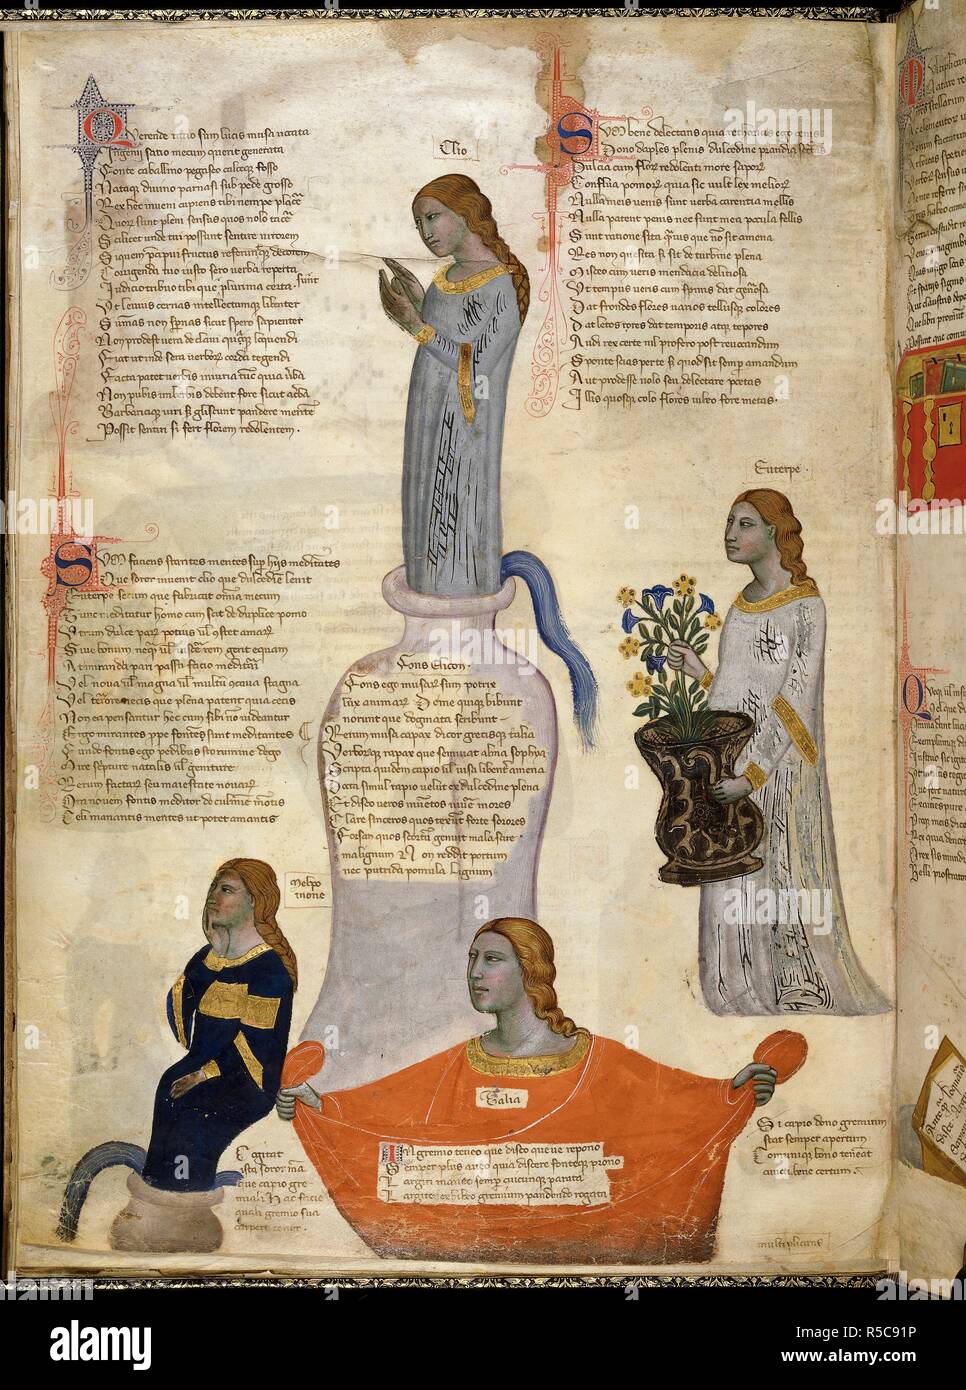 Miniature of Four Muses: Clio (history), Melpomene (tragedy), Euterpe (music) and Thalia (comedy). Address in verse to Robert of Anjou, King of Naples, from the town of Prato in Tuscany (the 'Regia Carmina'). Italy, Central (Tuscany); c. 1335-c. 1340. Source: Royal 6 E. IX, f.29v. Language: Latin. Stock Photo